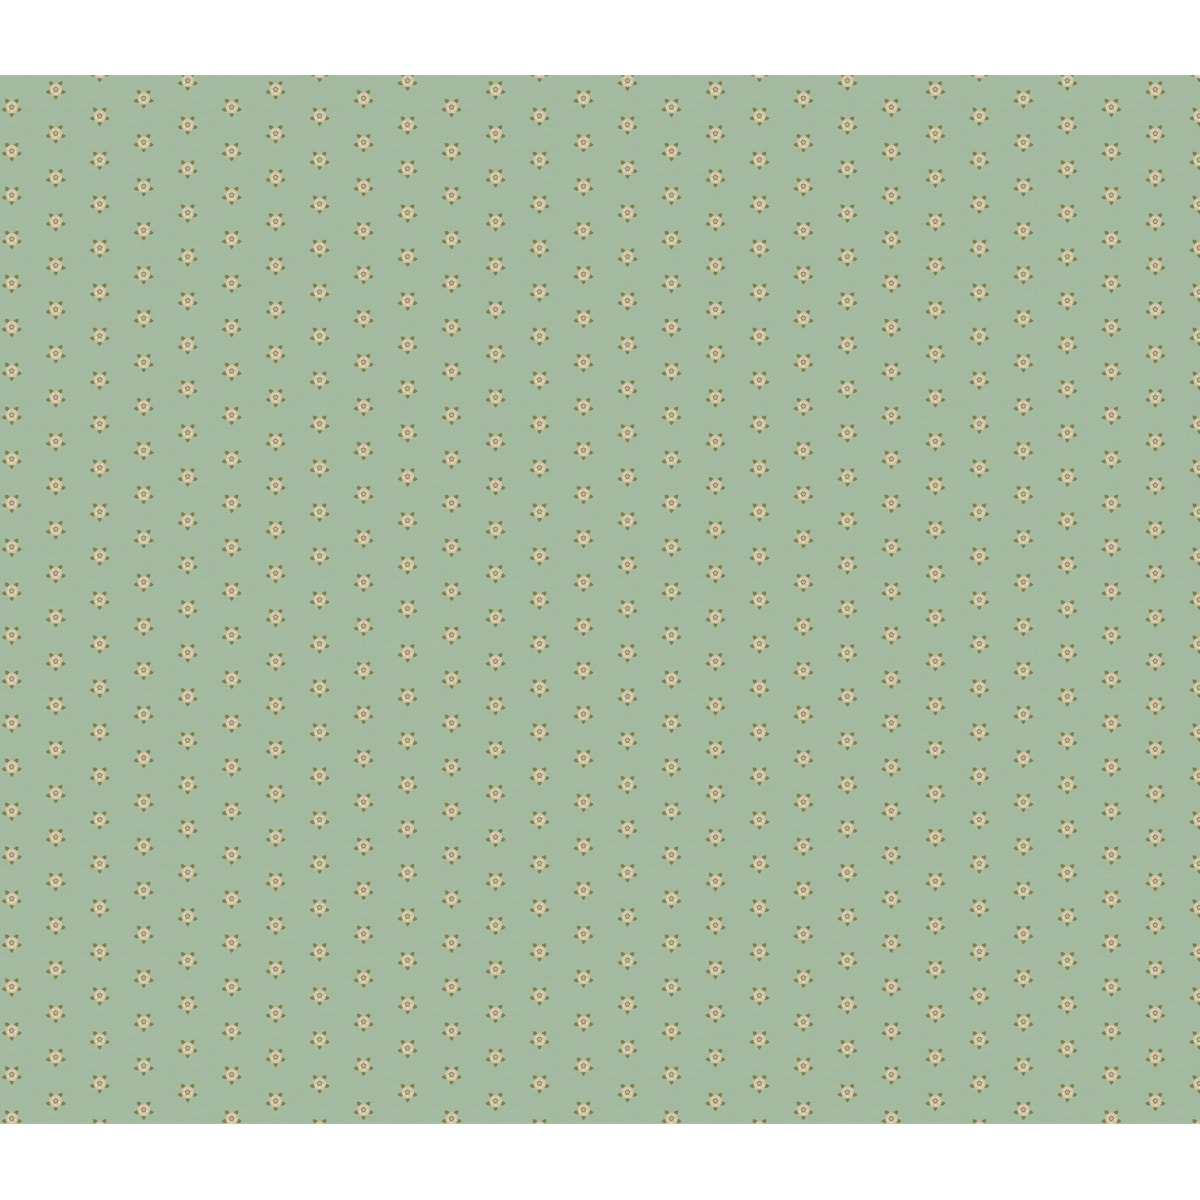 Solid Light Green Fabric, Wallpaper and Home Decor | Spoonflower